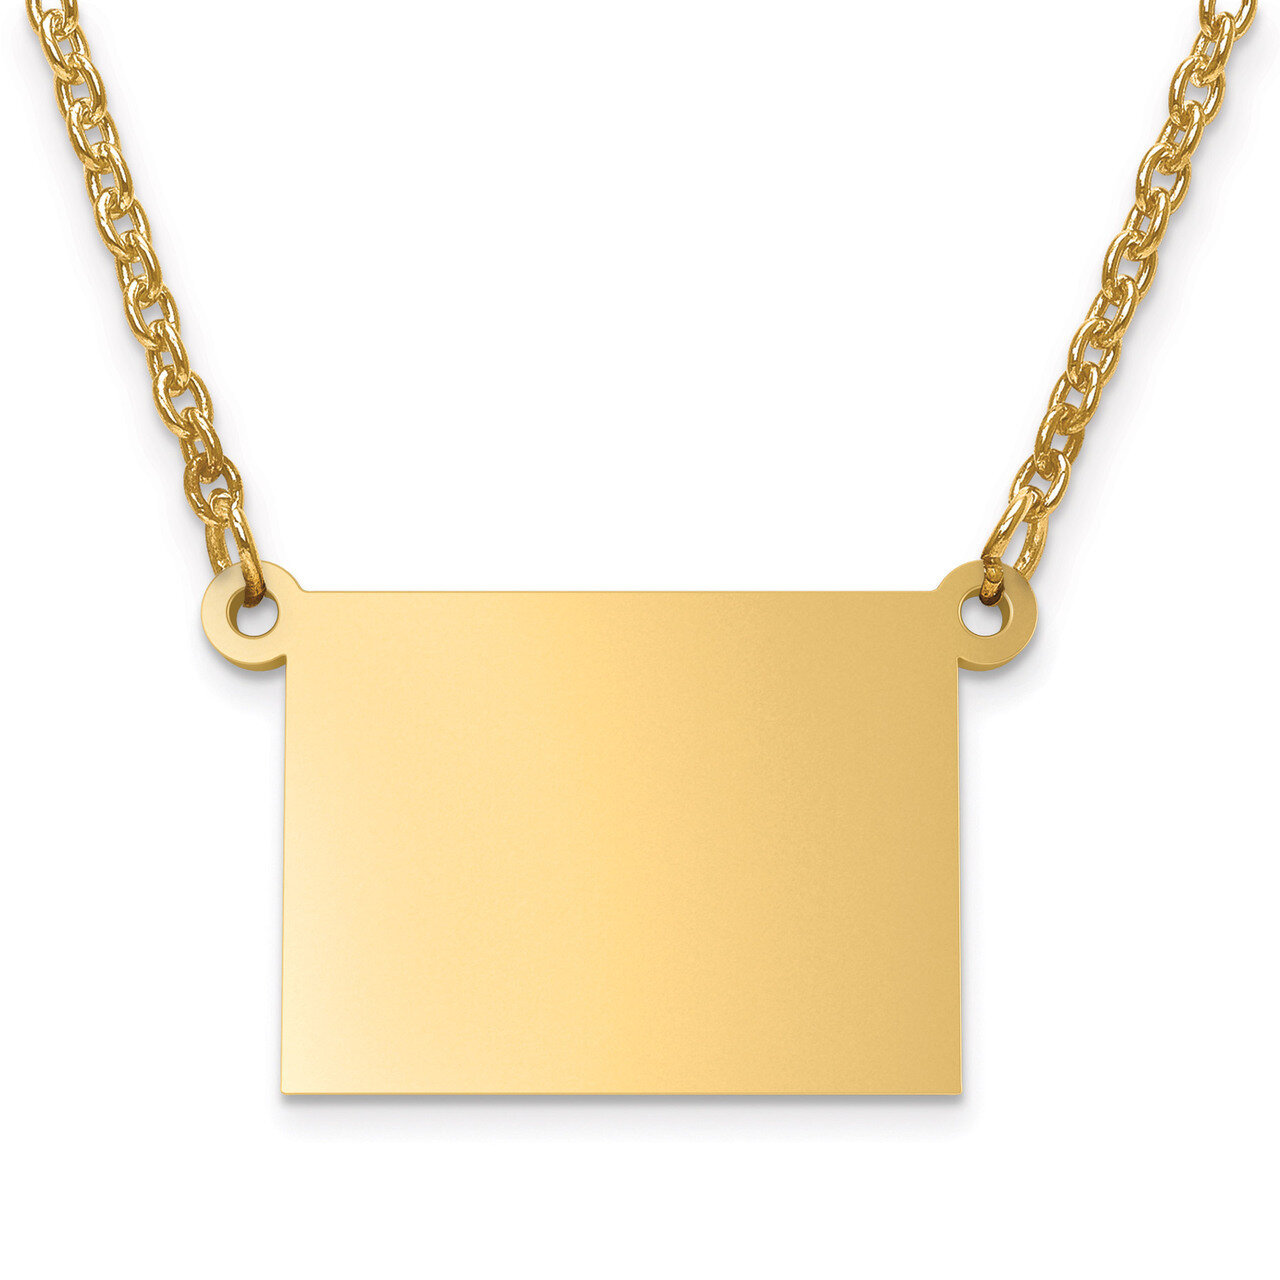 Colorado State Pendant with Chain Engravable Gold-plated on Sterling Silver